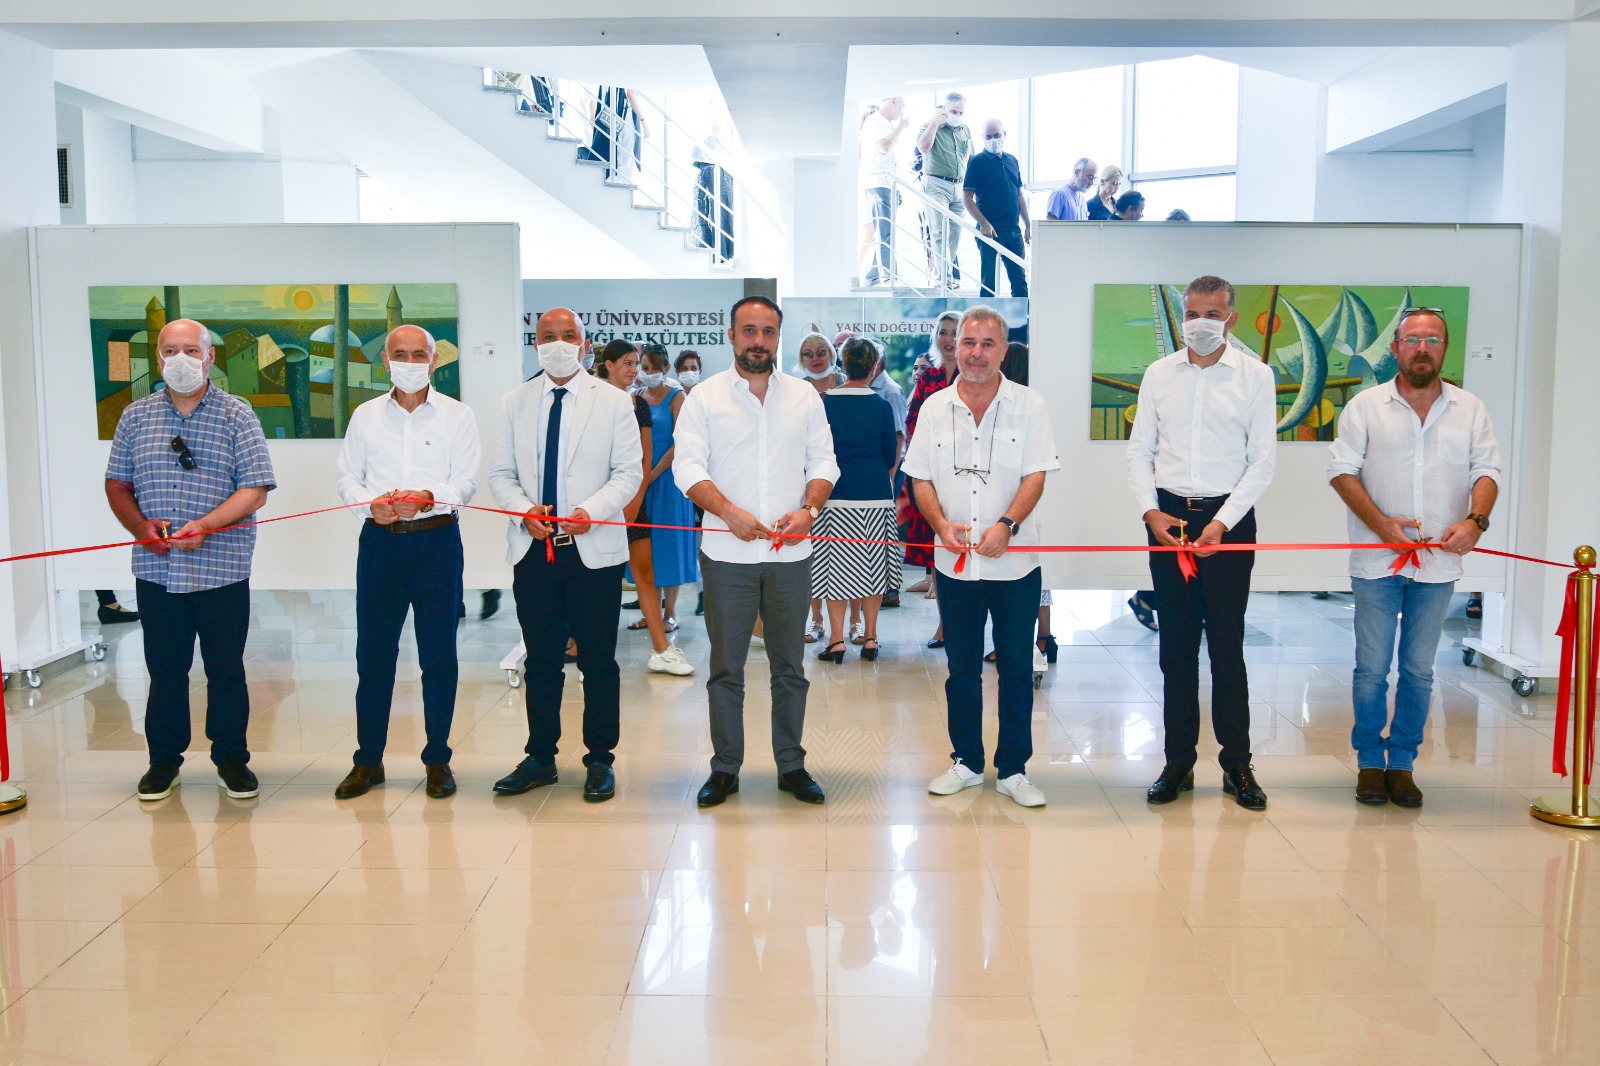 Created especially for the Cyprus Museum of Modern Arts, Artist and Academician Assoc. Prof. Dr. Murad Allahverdiyev’s Personal Exhibition Comprising 25 Artwork titled as “Breezes from the Island” has been opened by the Chairman of the Board of Trustees of Near East University Prof. Dr. İrfan S. Günsel